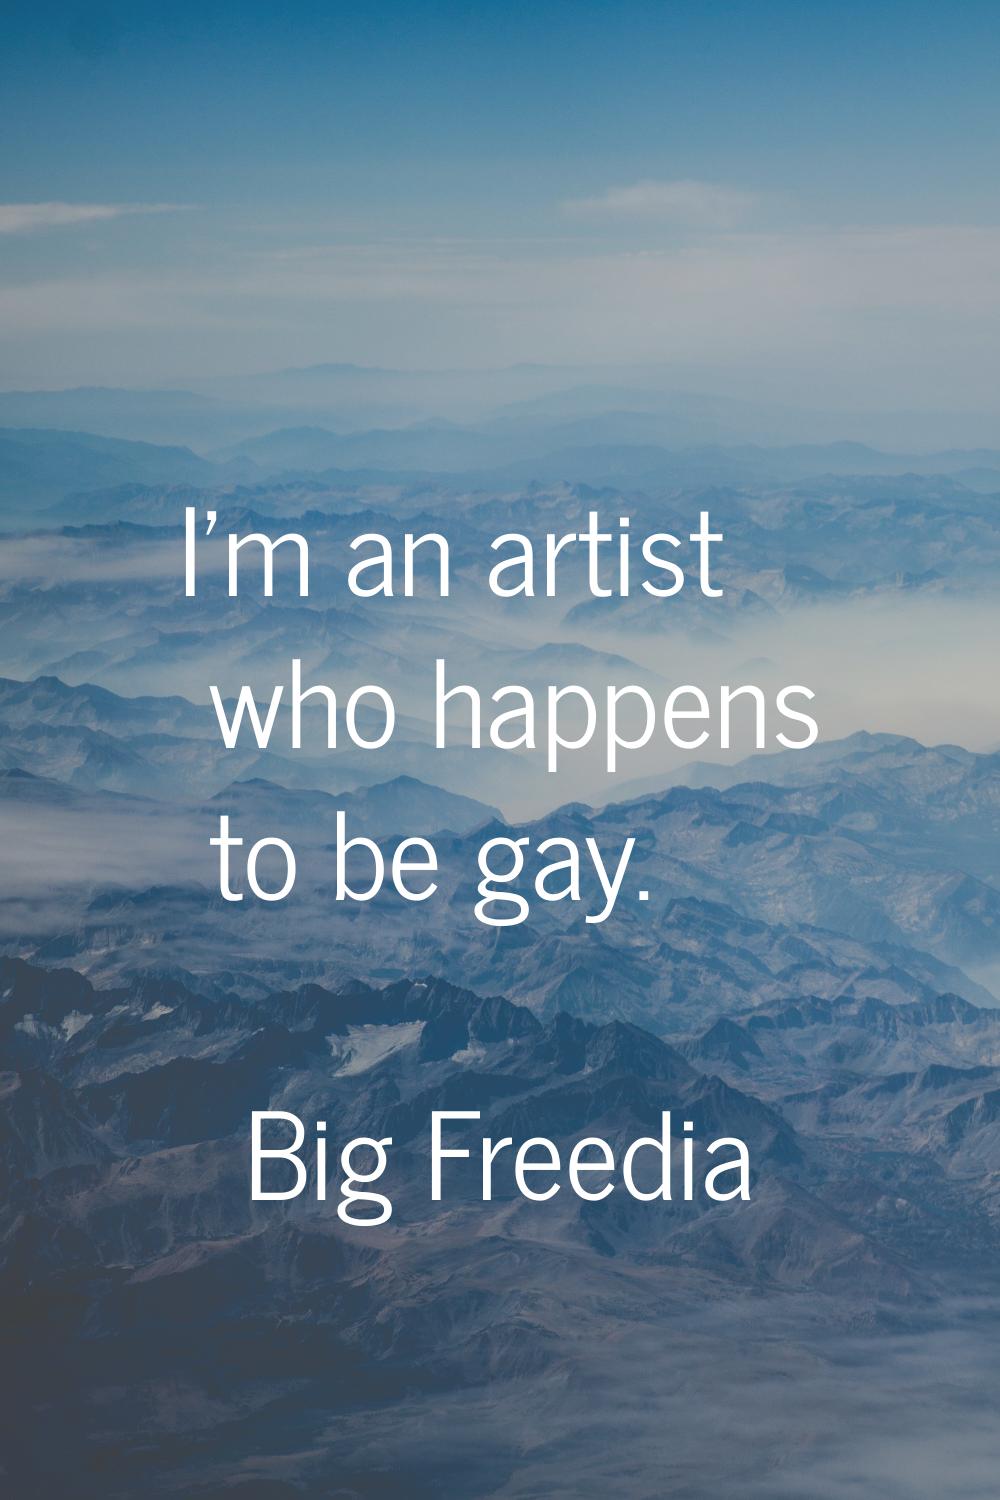 I'm an artist who happens to be gay.